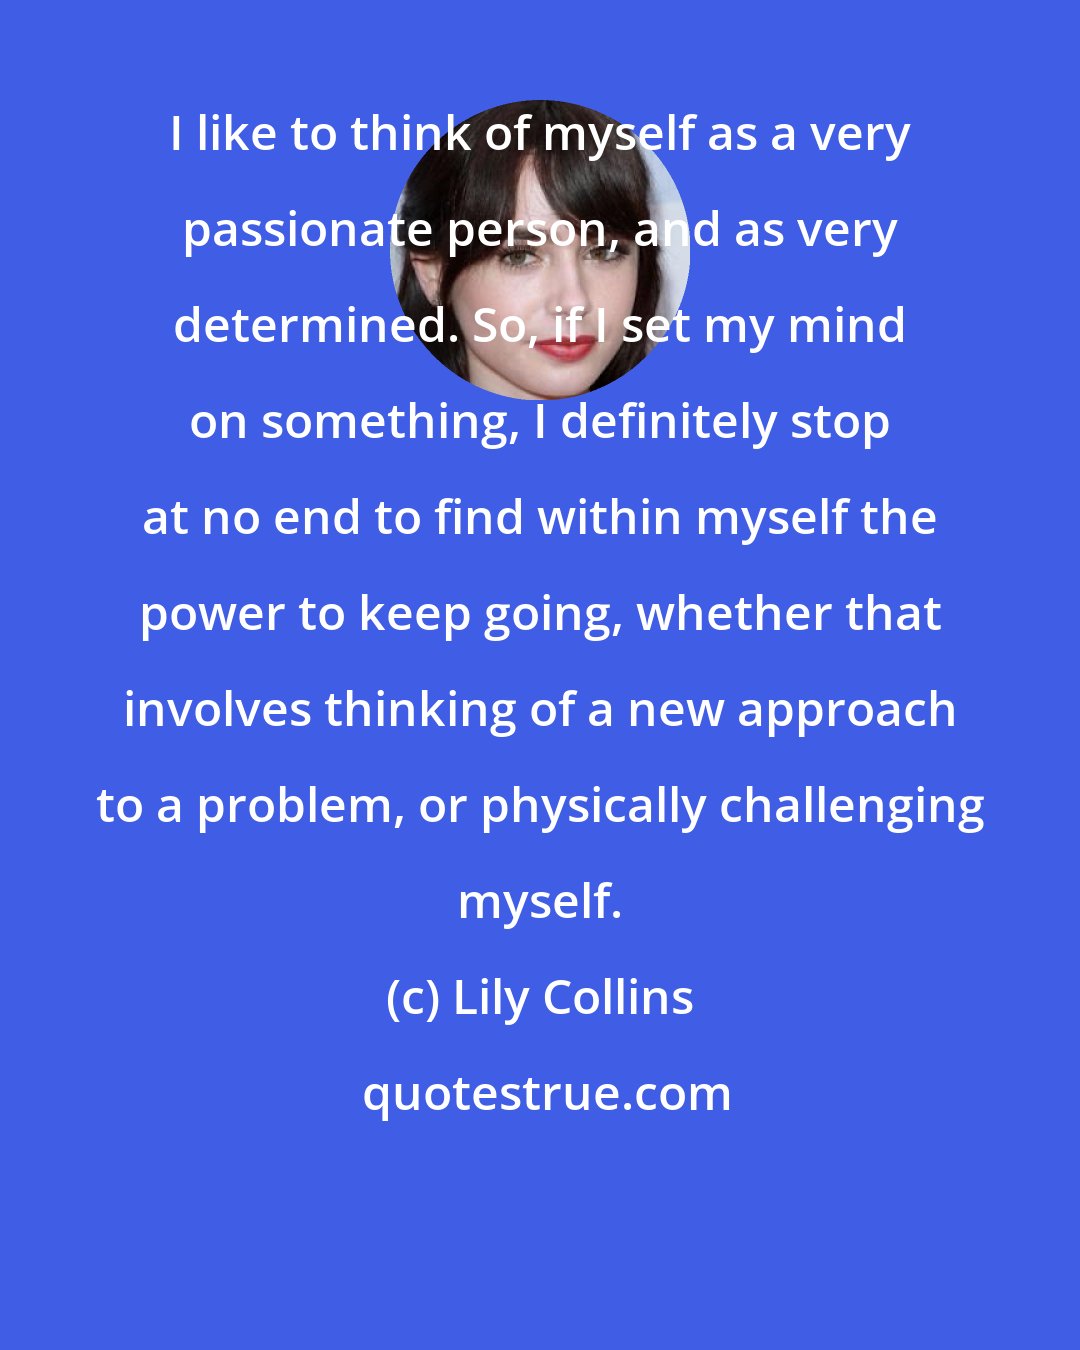 Lily Collins: I like to think of myself as a very passionate person, and as very determined. So, if I set my mind on something, I definitely stop at no end to find within myself the power to keep going, whether that involves thinking of a new approach to a problem, or physically challenging myself.